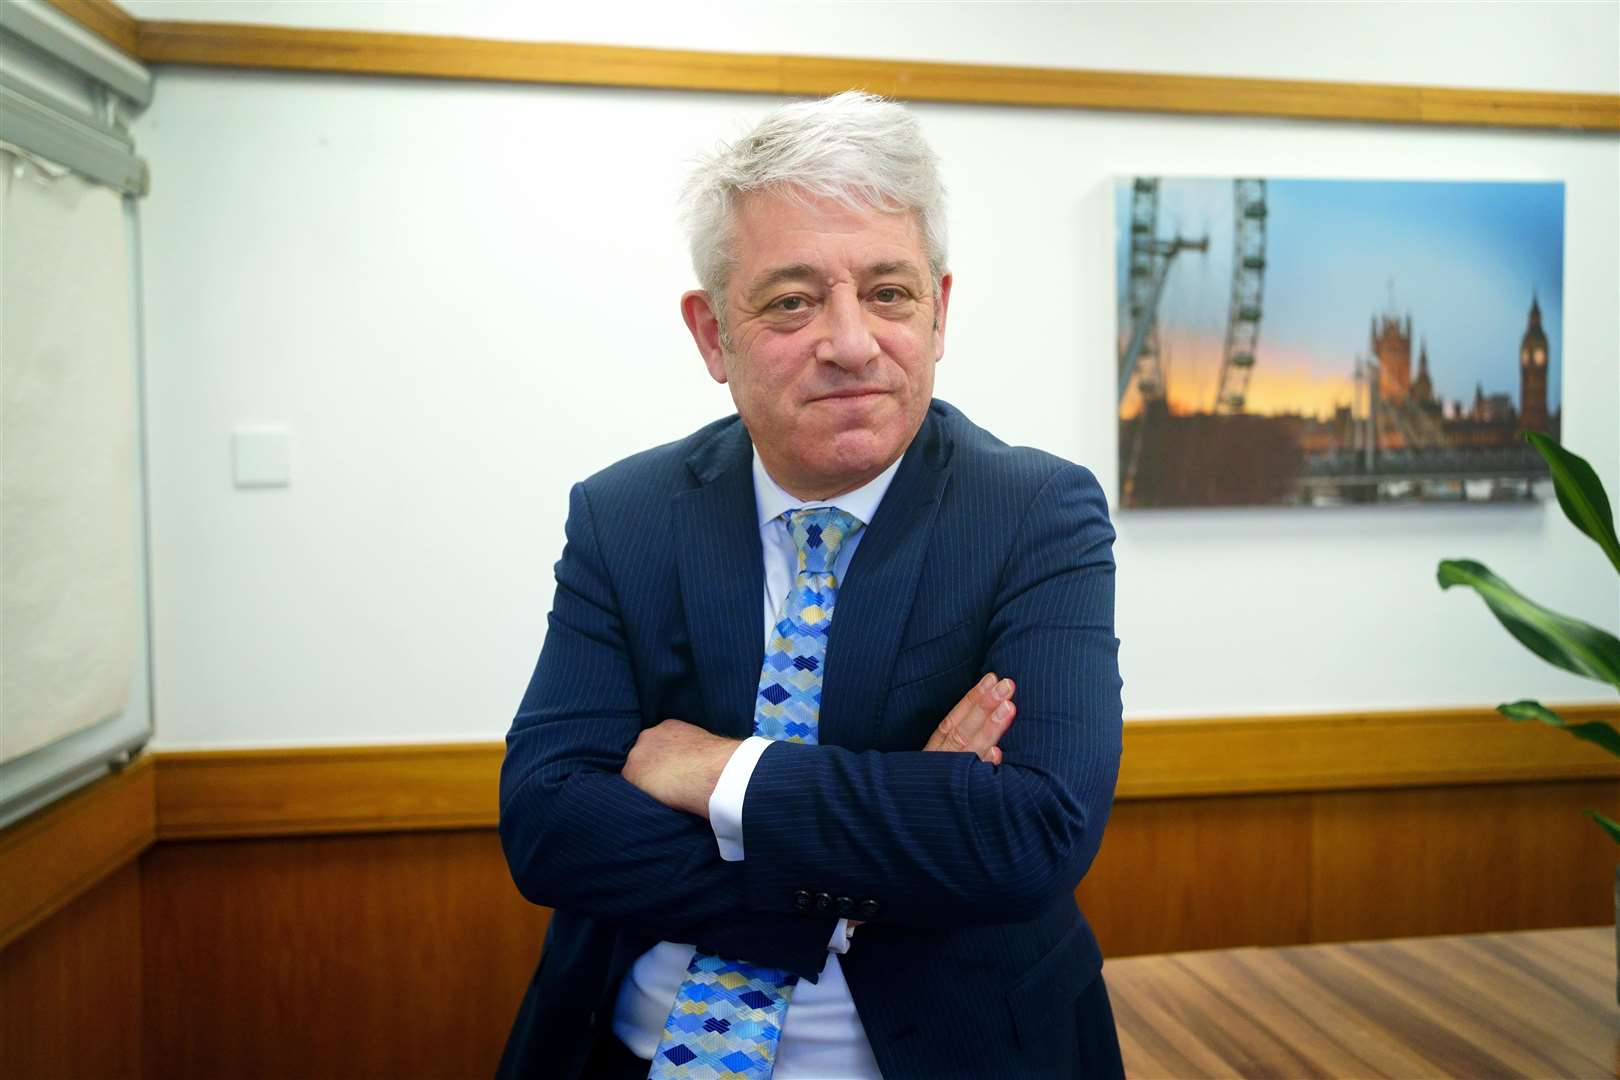 John Bercow stepped down as speaker in 2019 after a decade (Victoria Jones/PA)